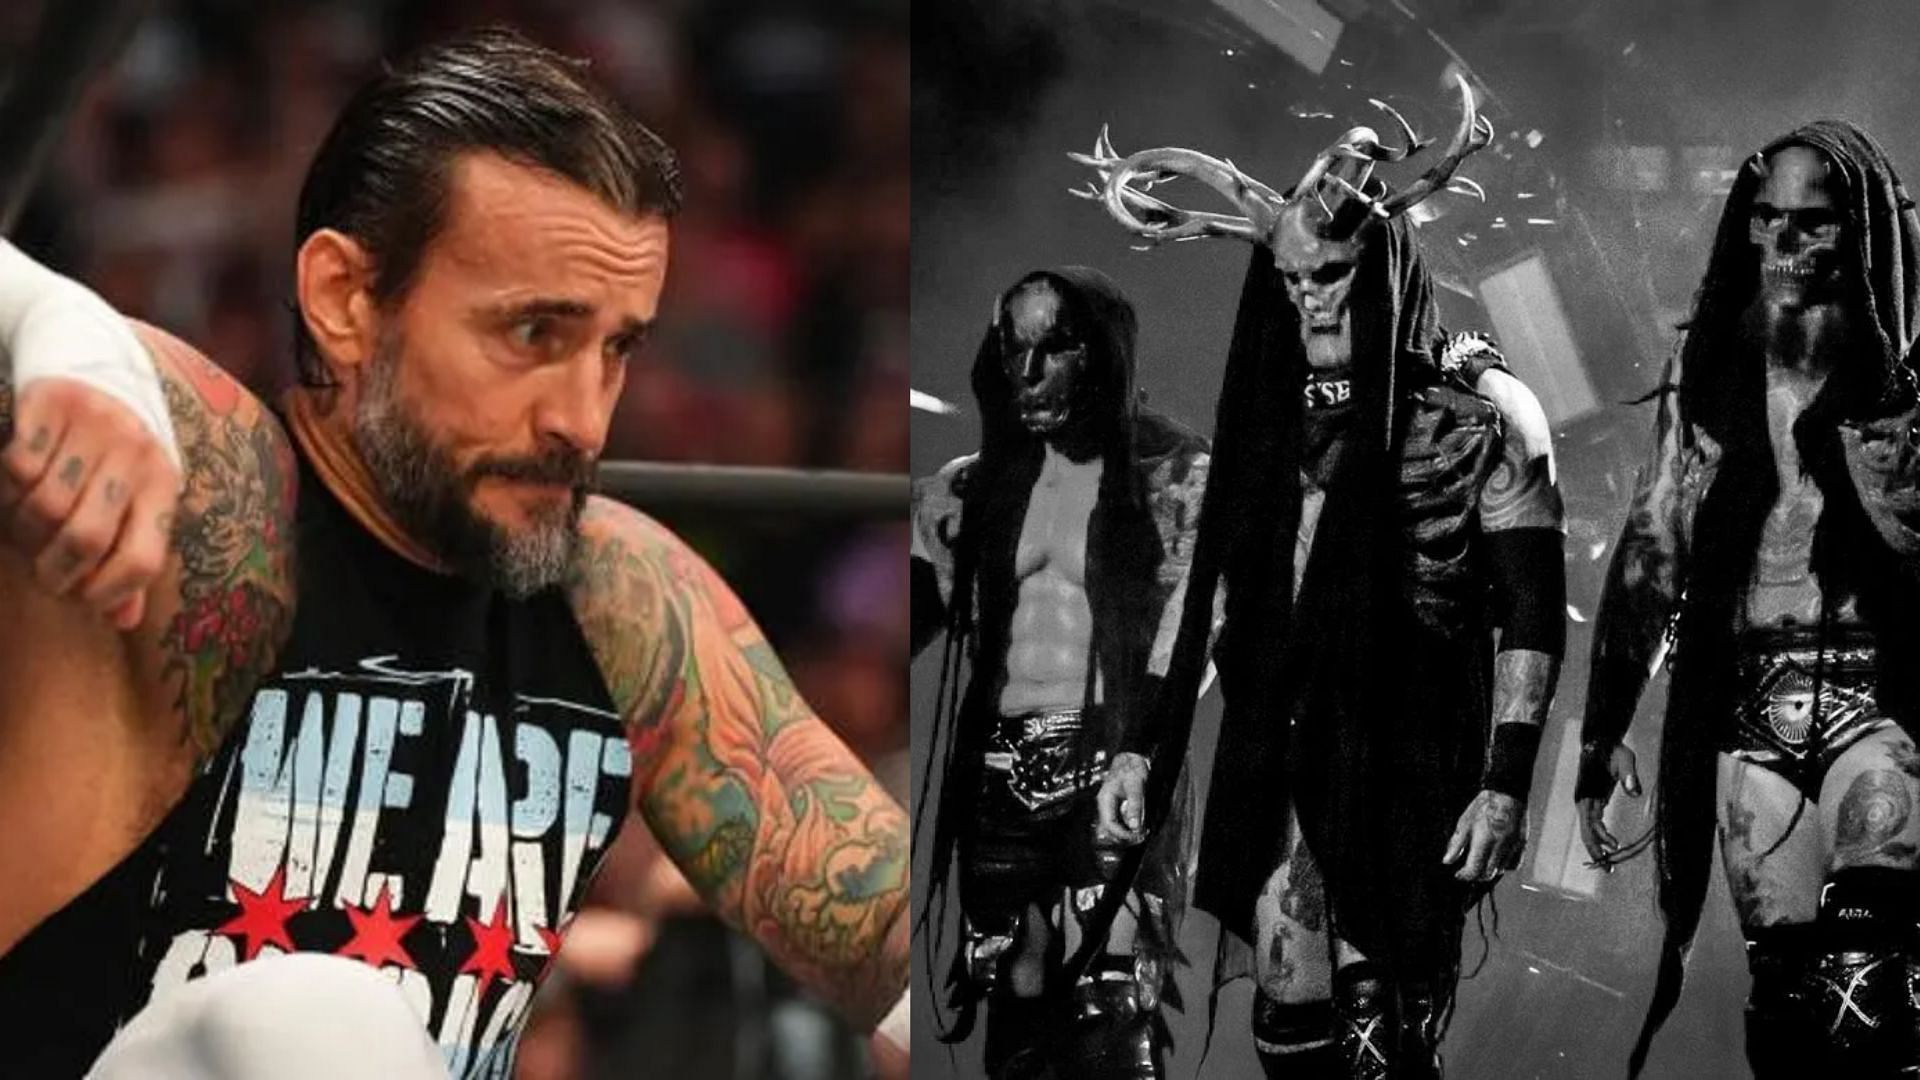 House of Black member shares a picture with CM Punk